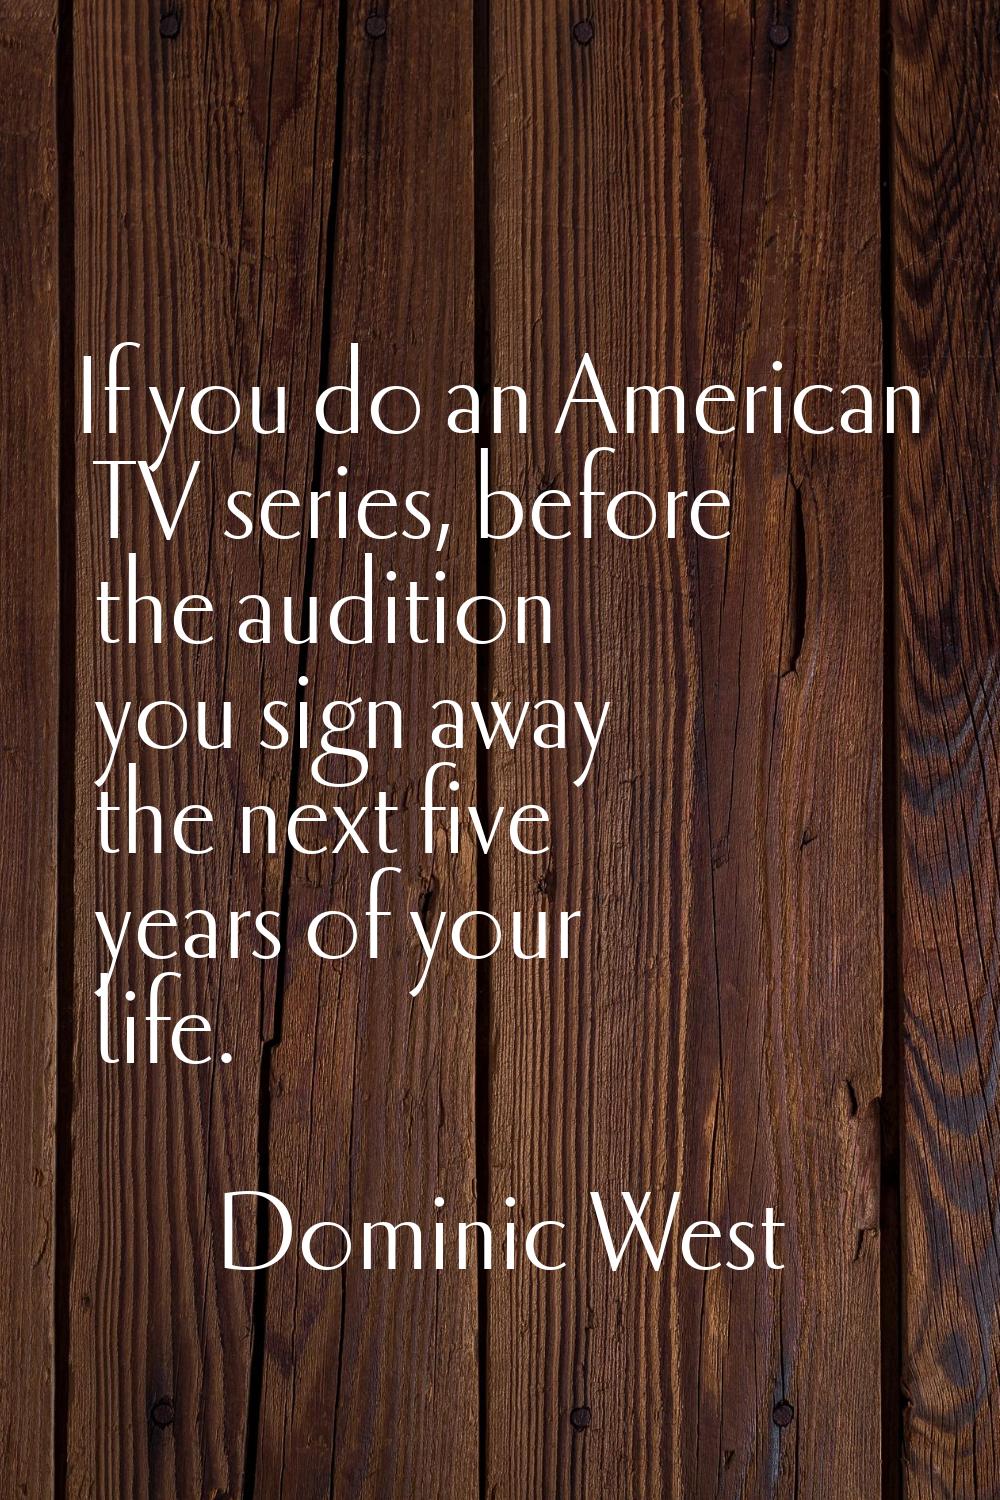 If you do an American TV series, before the audition you sign away the next five years of your life